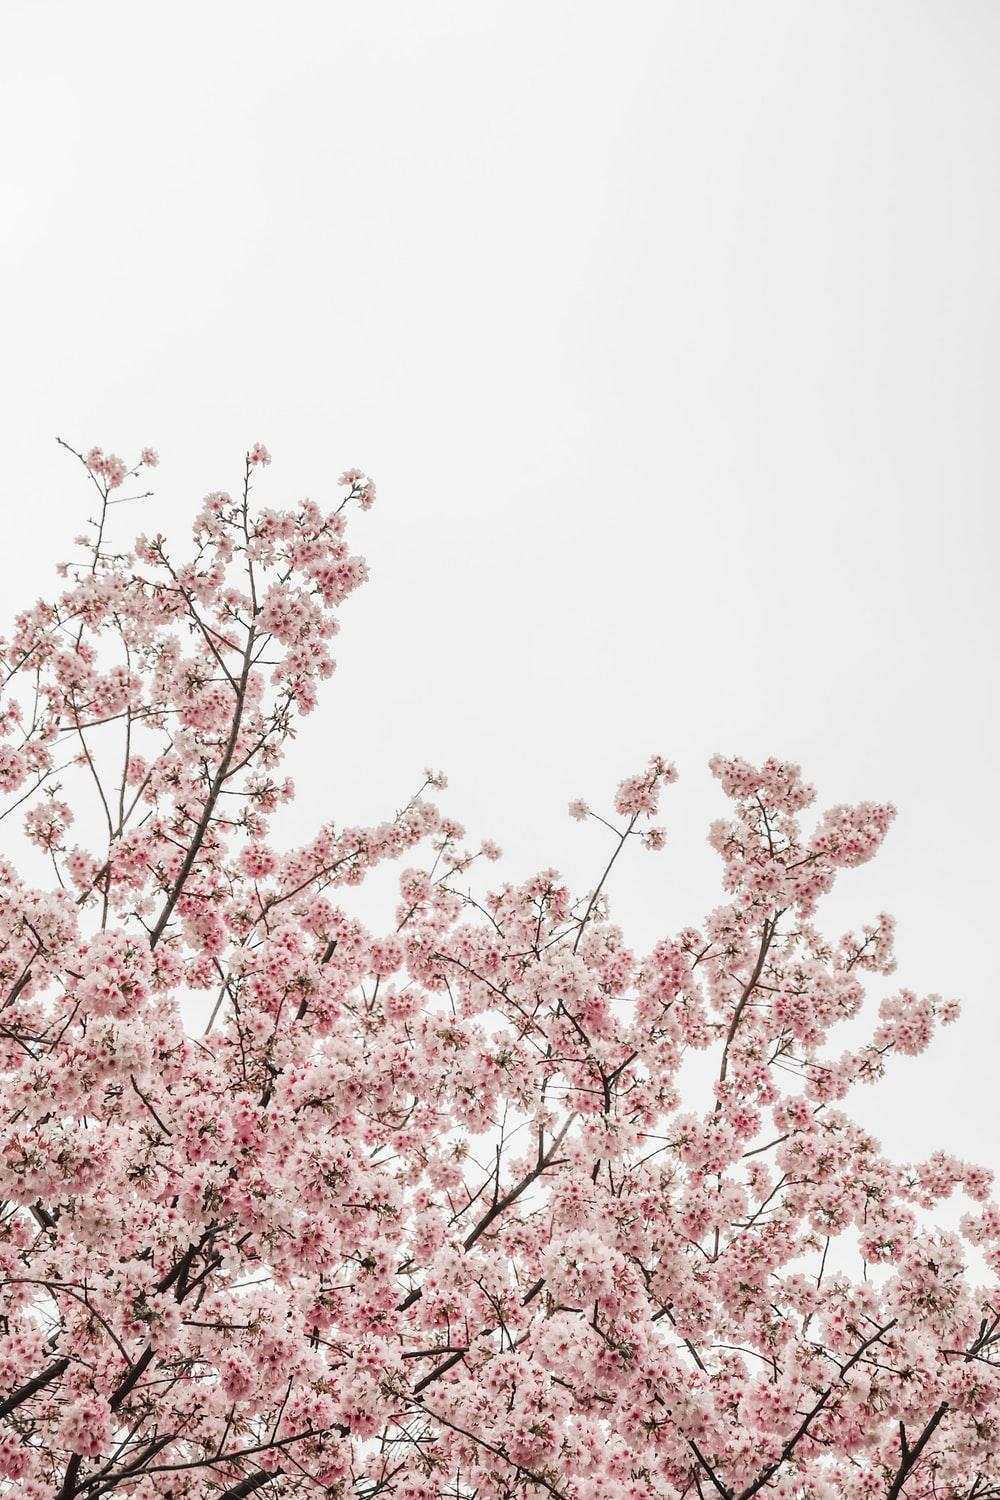 500+] Cherry Blossom Wallpapers